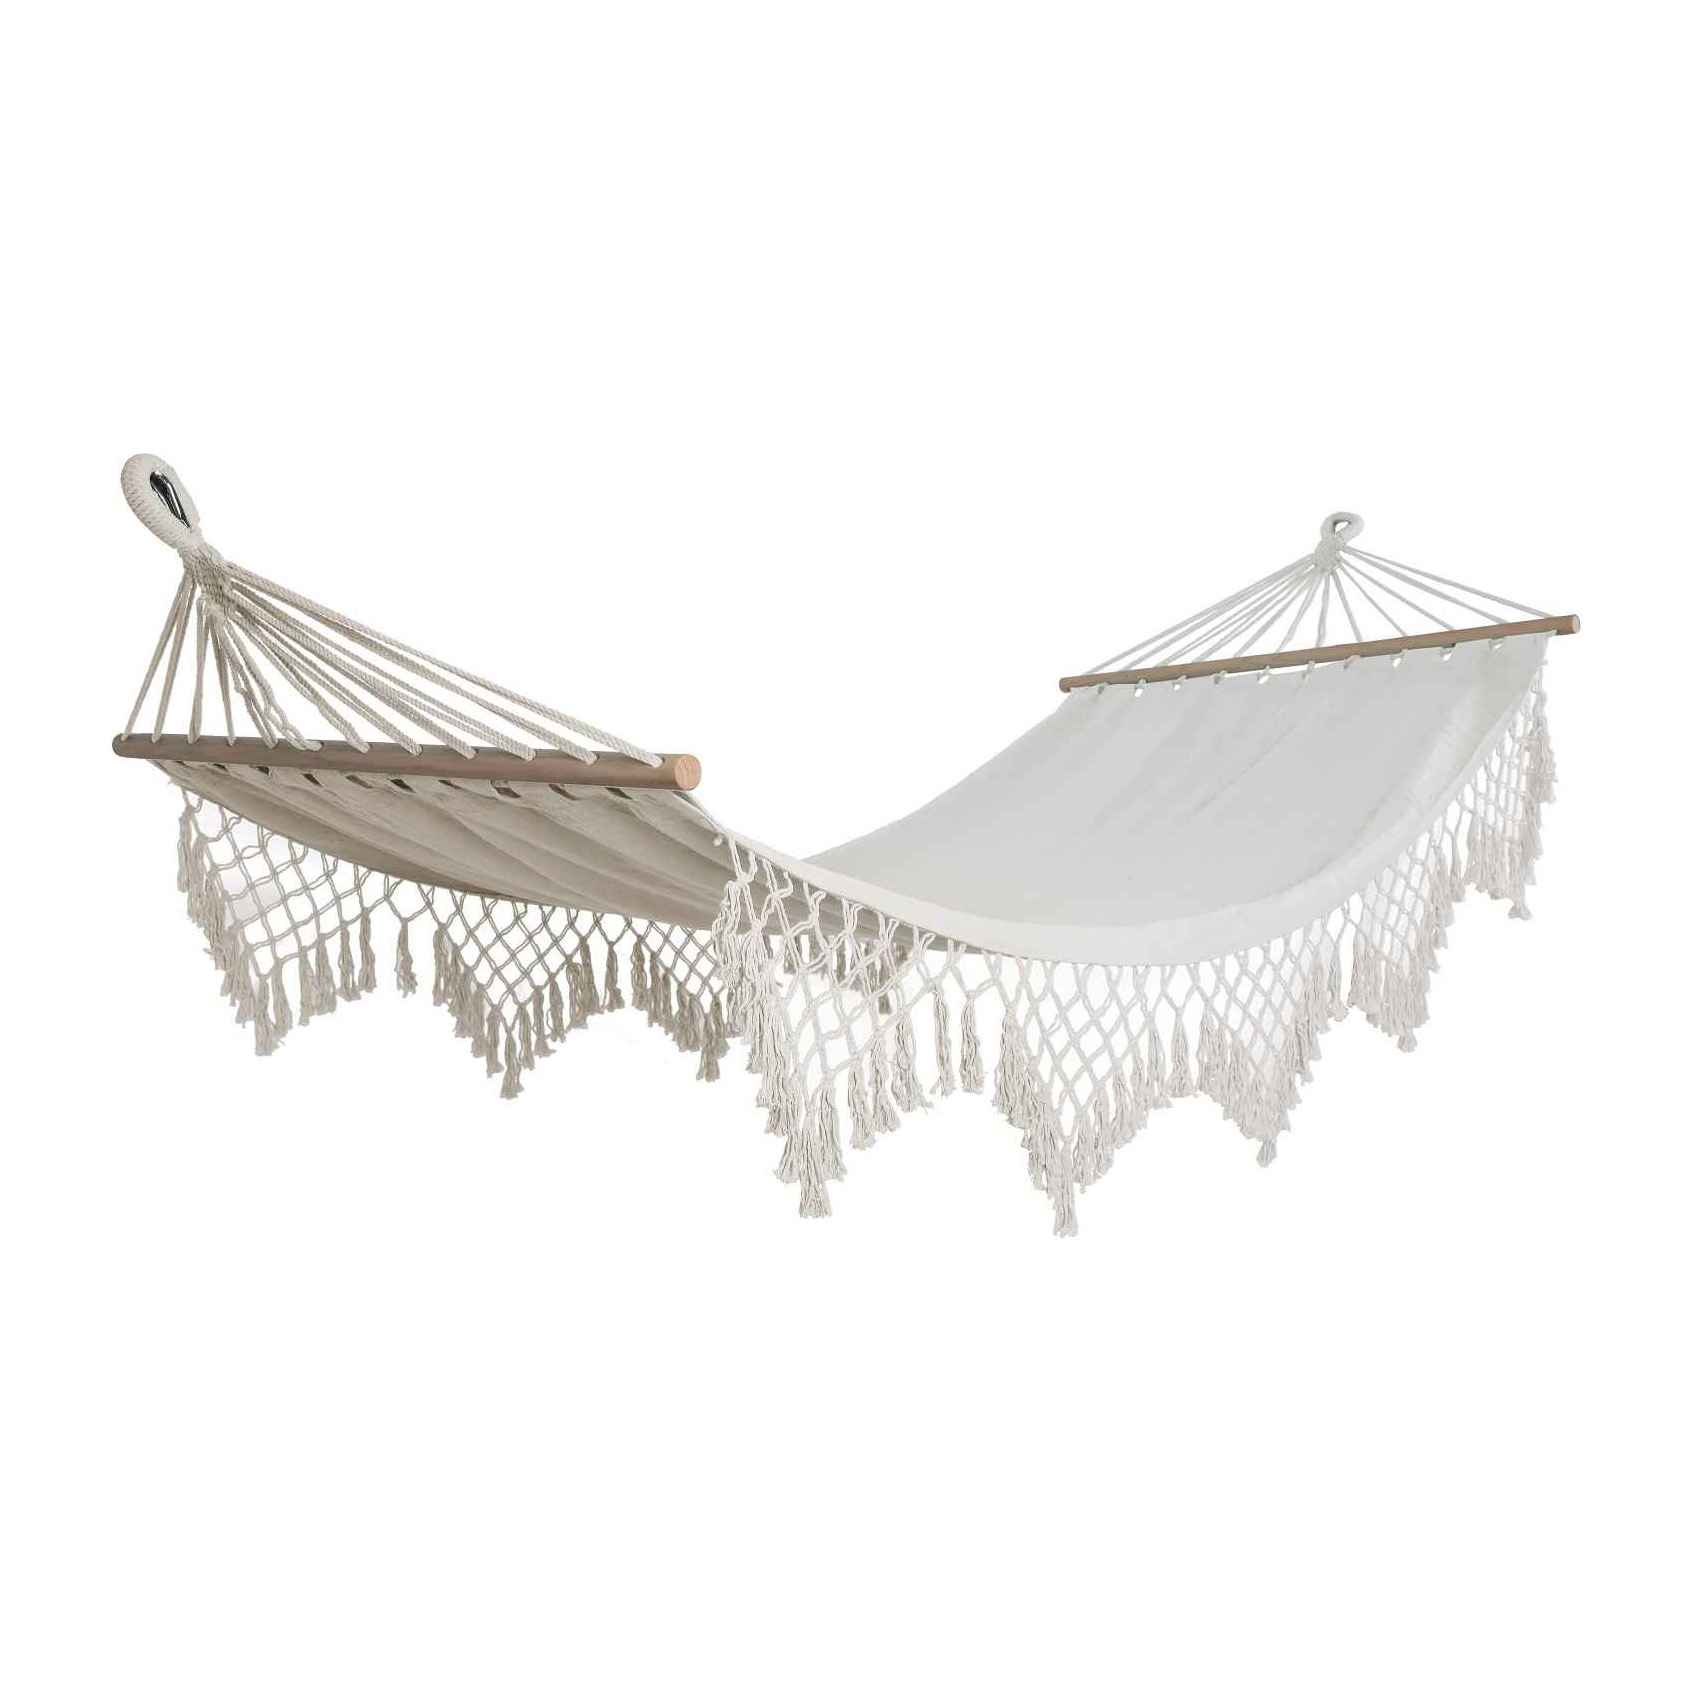 Hangit Macrame Swing chair with deco fringes and cushions - Blue